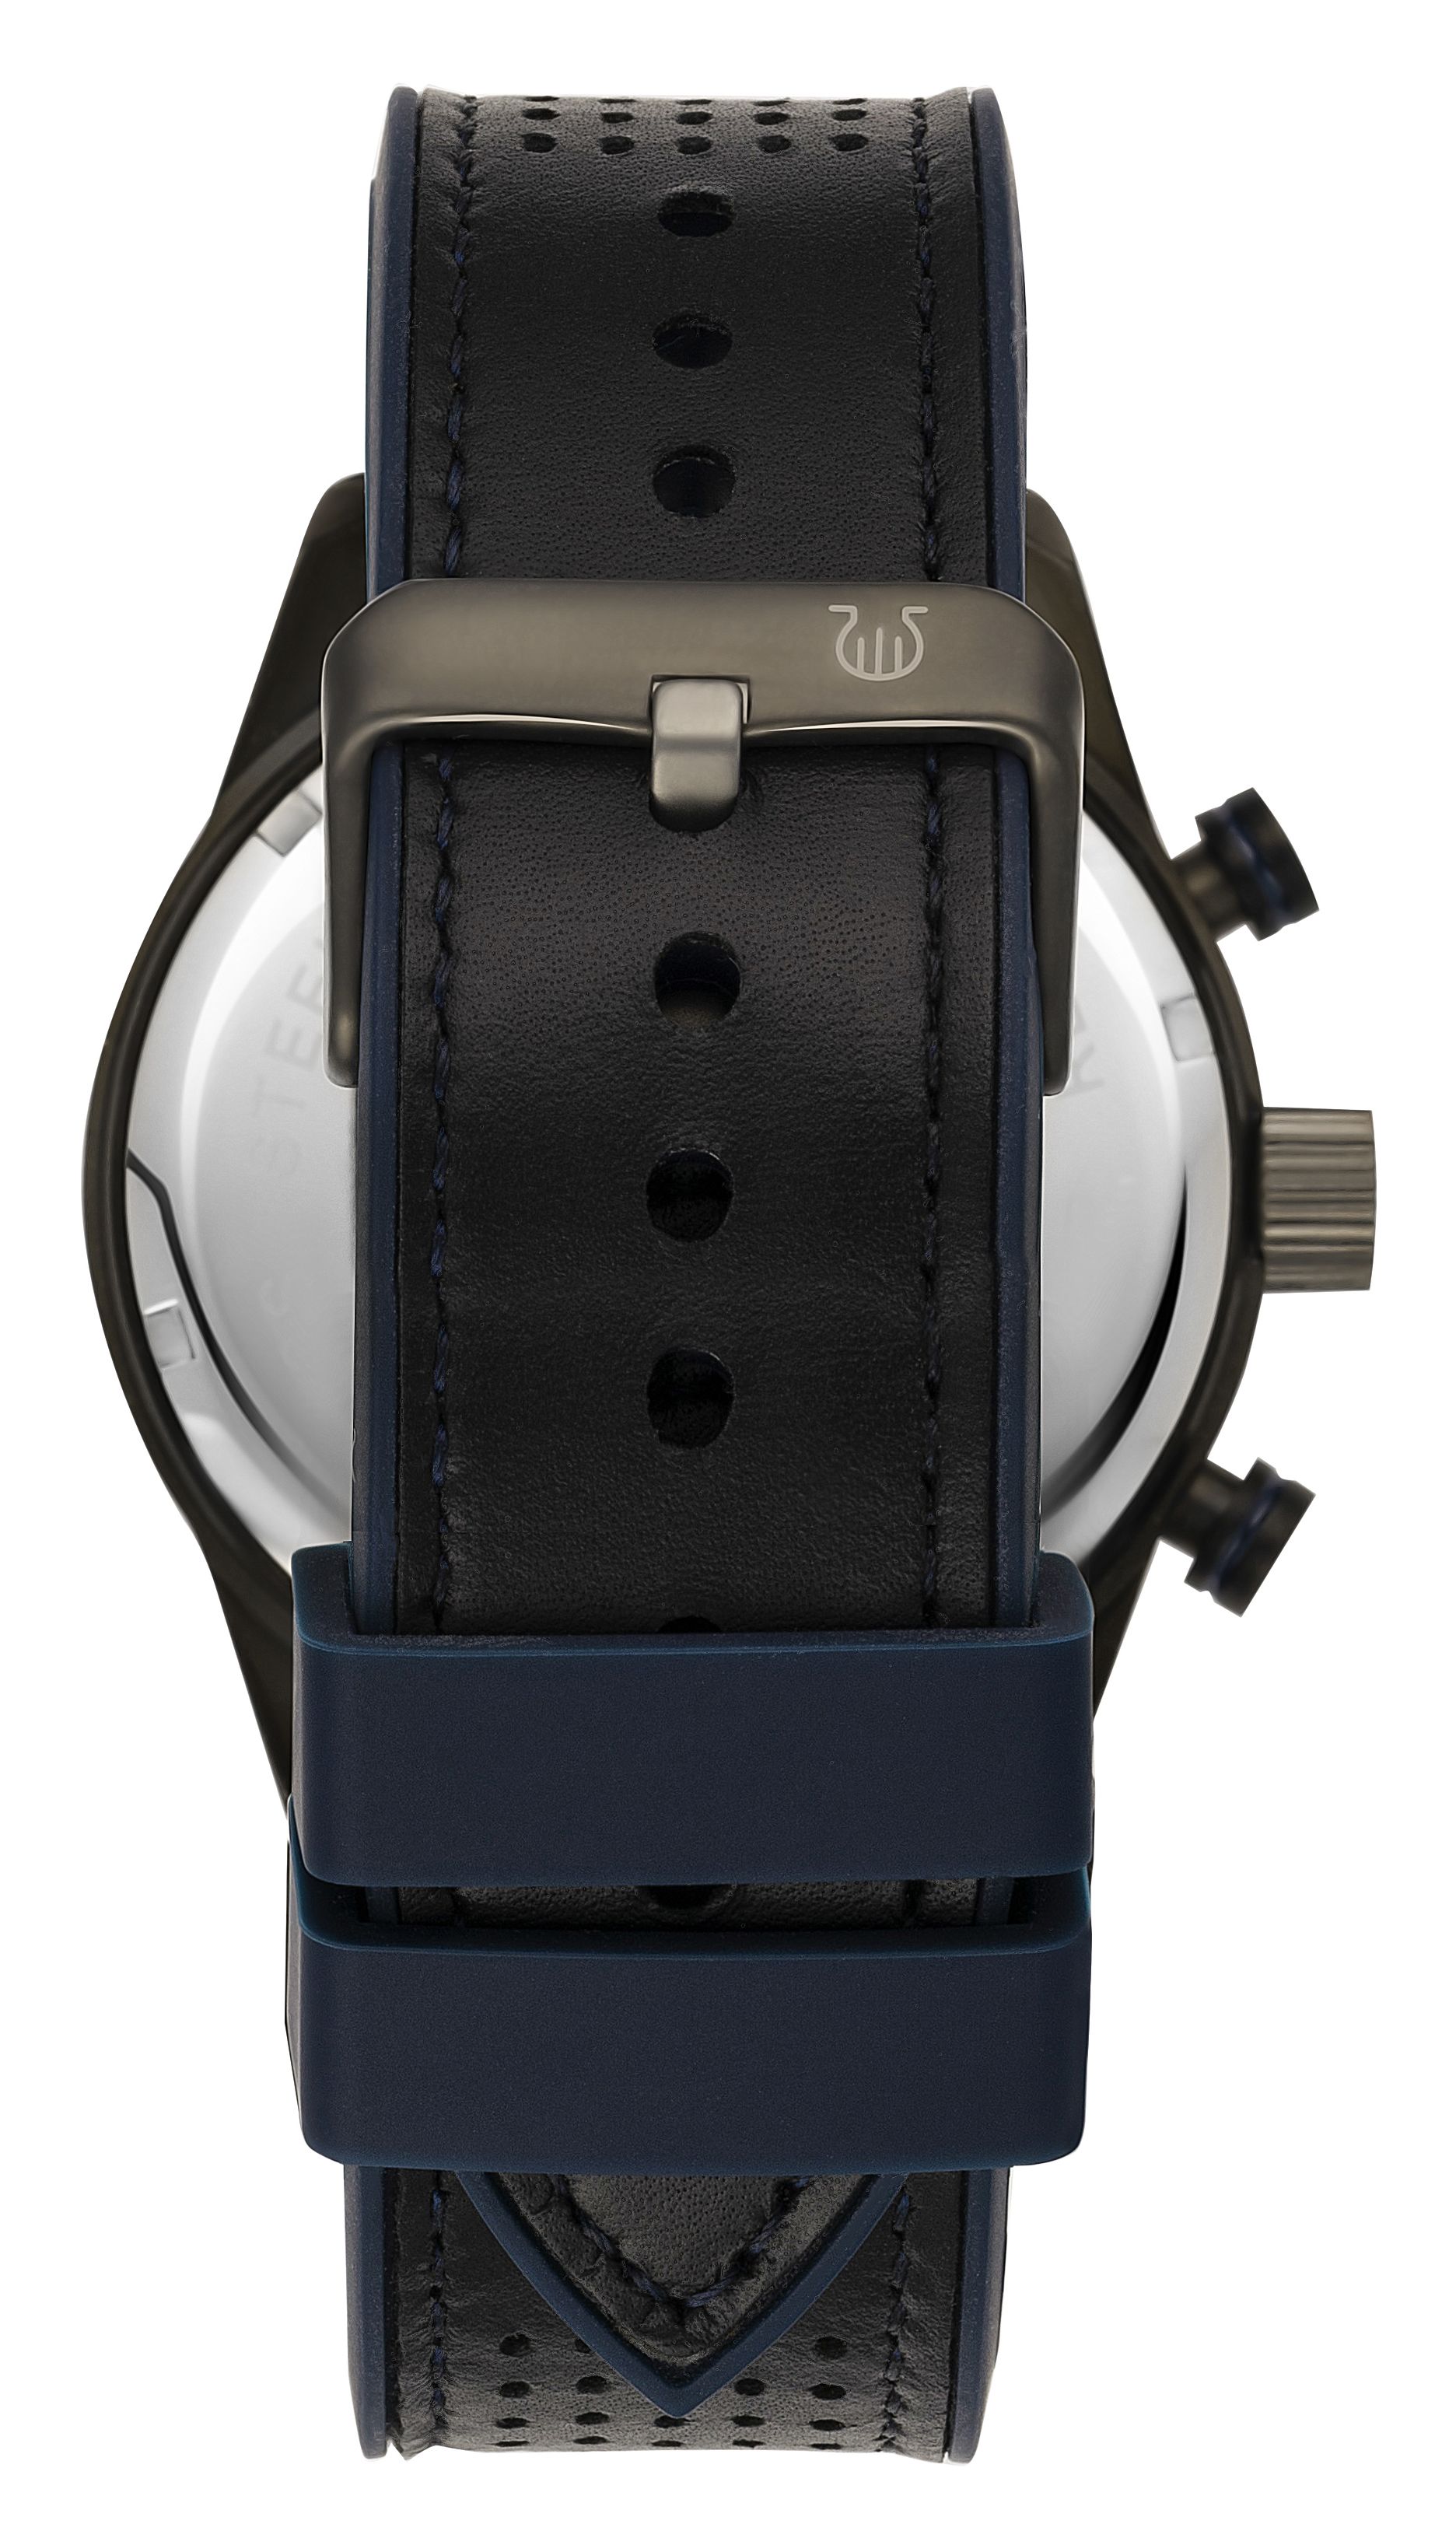 This Orphelia Sandblast Multi Dial Watch for Men is the perfect timepiece to wear or to gift. It's Gun 44 mm Round case combined with the comfortable Blue Silicone watch band will ensure you enjoy this stunning timepiece without any compromise. Operated by a high quality Quartz movement and water resistant to 10 bars, your watch will keep ticking. LUXURY DESIGN: ORPHELIA Sandblast Multi dial watch with a Miyota Quartz movement includes a date display. This watch features a a 24 hour display, Tachymeter and Luminous hands & numbers it will give you an urbane look PREMIUM QUALITY: By using high-quality materials  Glass: Mineral Glass  Case material: Stainless steel  Bracelet material: Silicone- Water resistant: 10 bars COMPACT SIZE: Case diameter: 44 mm  Height: 12 mm  Strap- Length: 23 cm  Width: 22 mm. Due to this practical handy size  the watch is absolutely for everyday use-Weight: 88 g